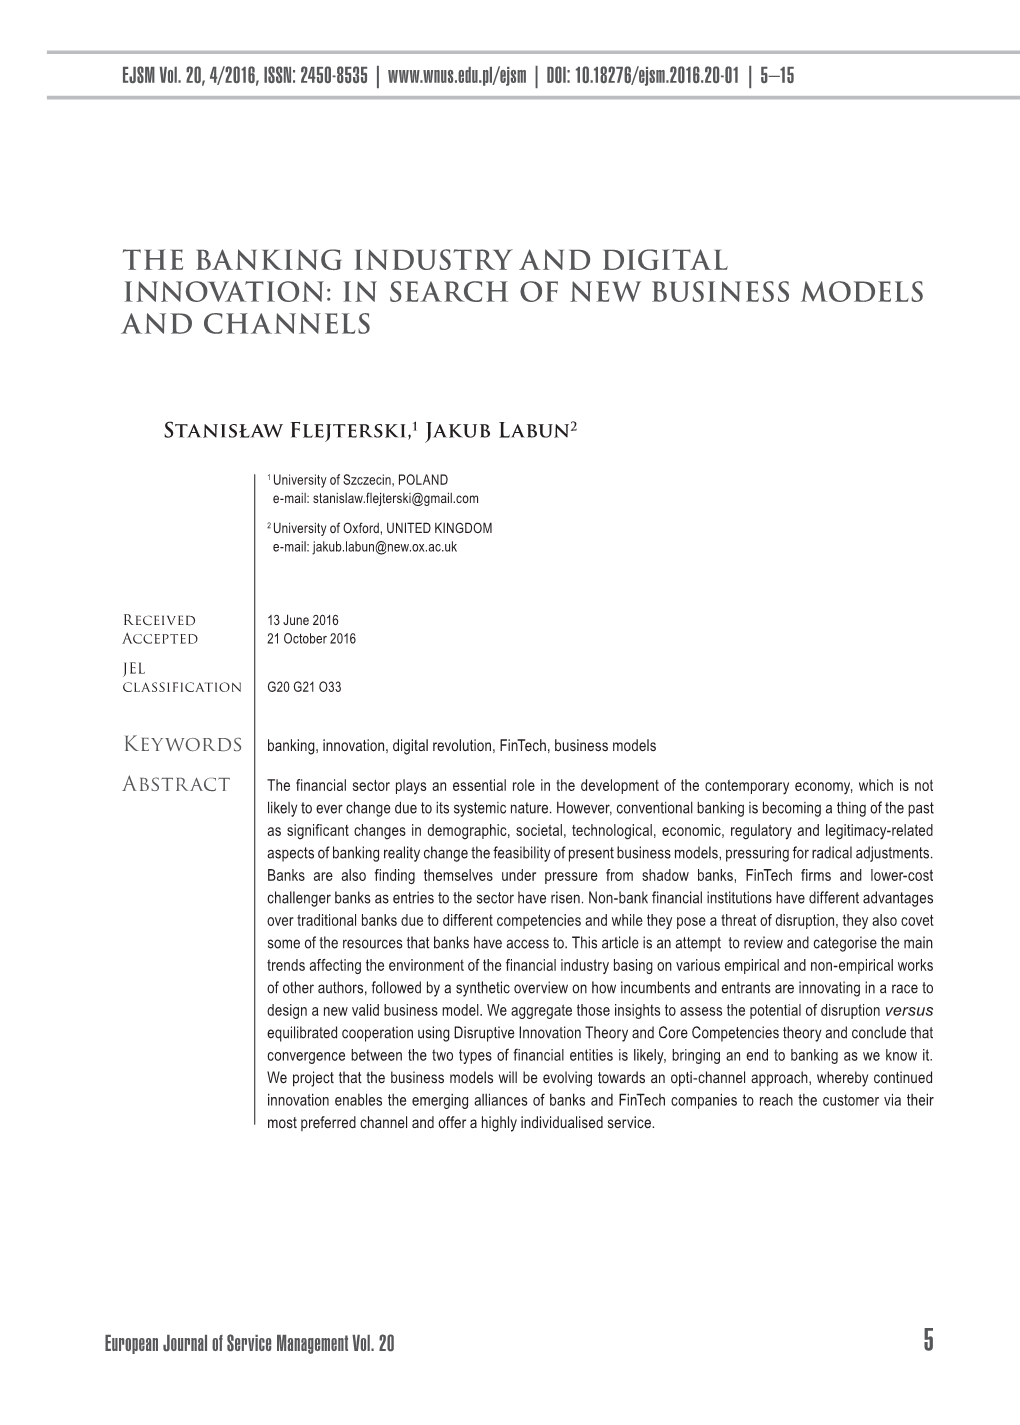 The Banking Industry and Digital Innovation: in Search of New Business Models and Channels